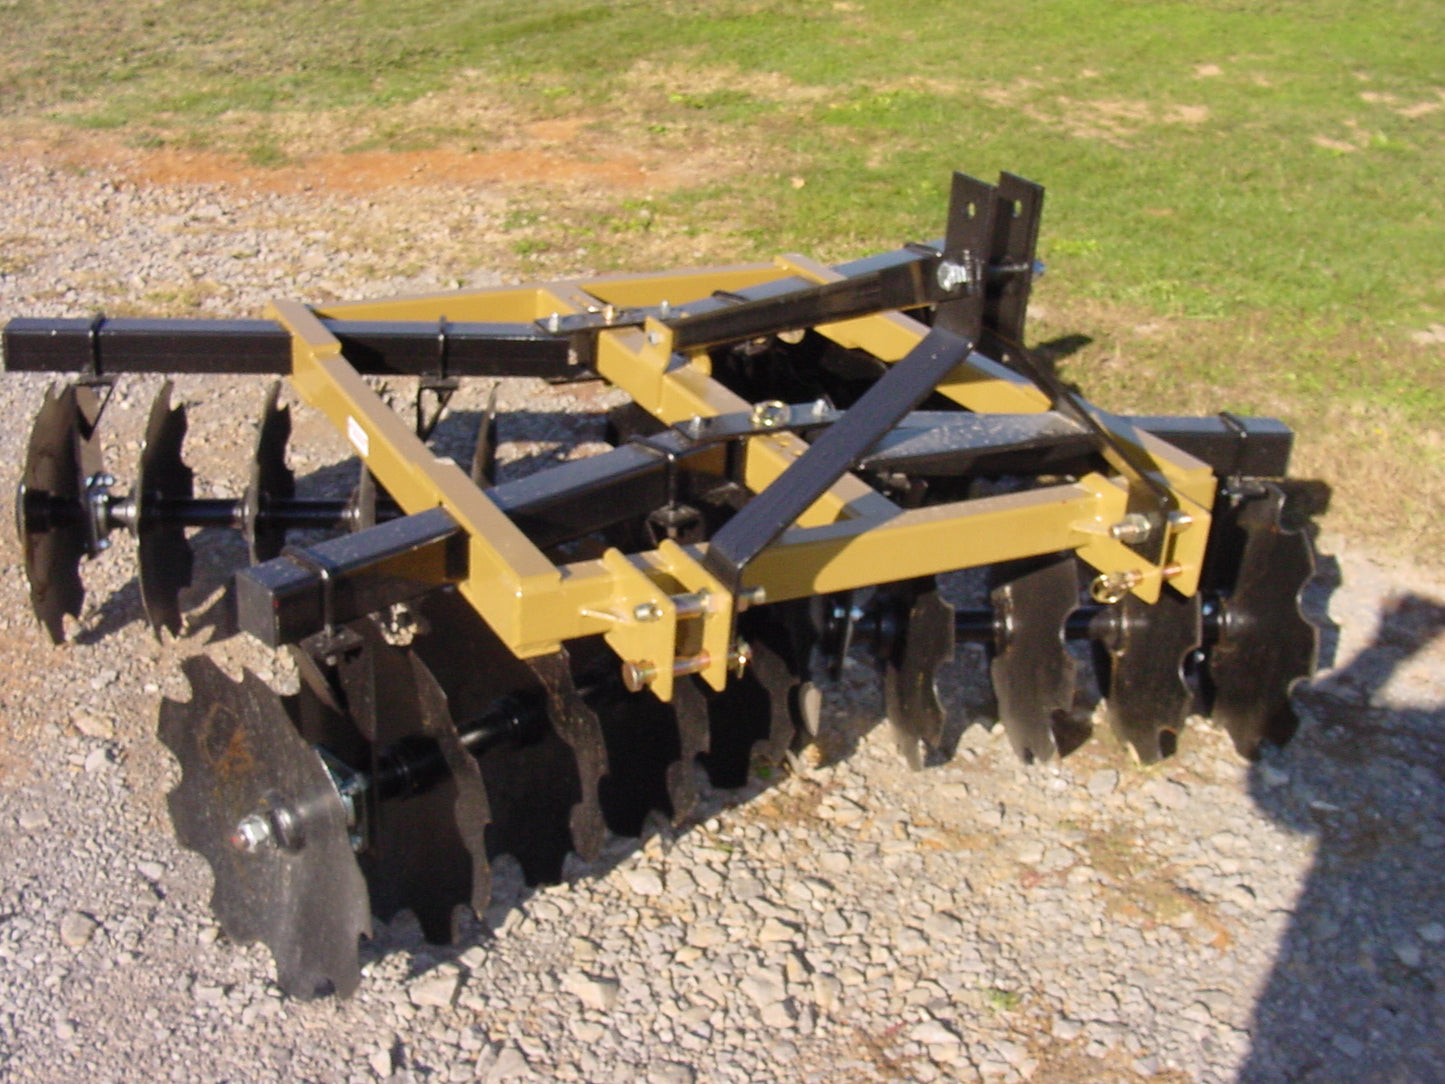 A & B EAGLELINE EQUIPMENT 3 PT. 4'-4" TO 7'-7" EAGLE STANDARD DISC HARROW - CO-ALL CUT-OUT 18" BLADES FOR TRACTOR